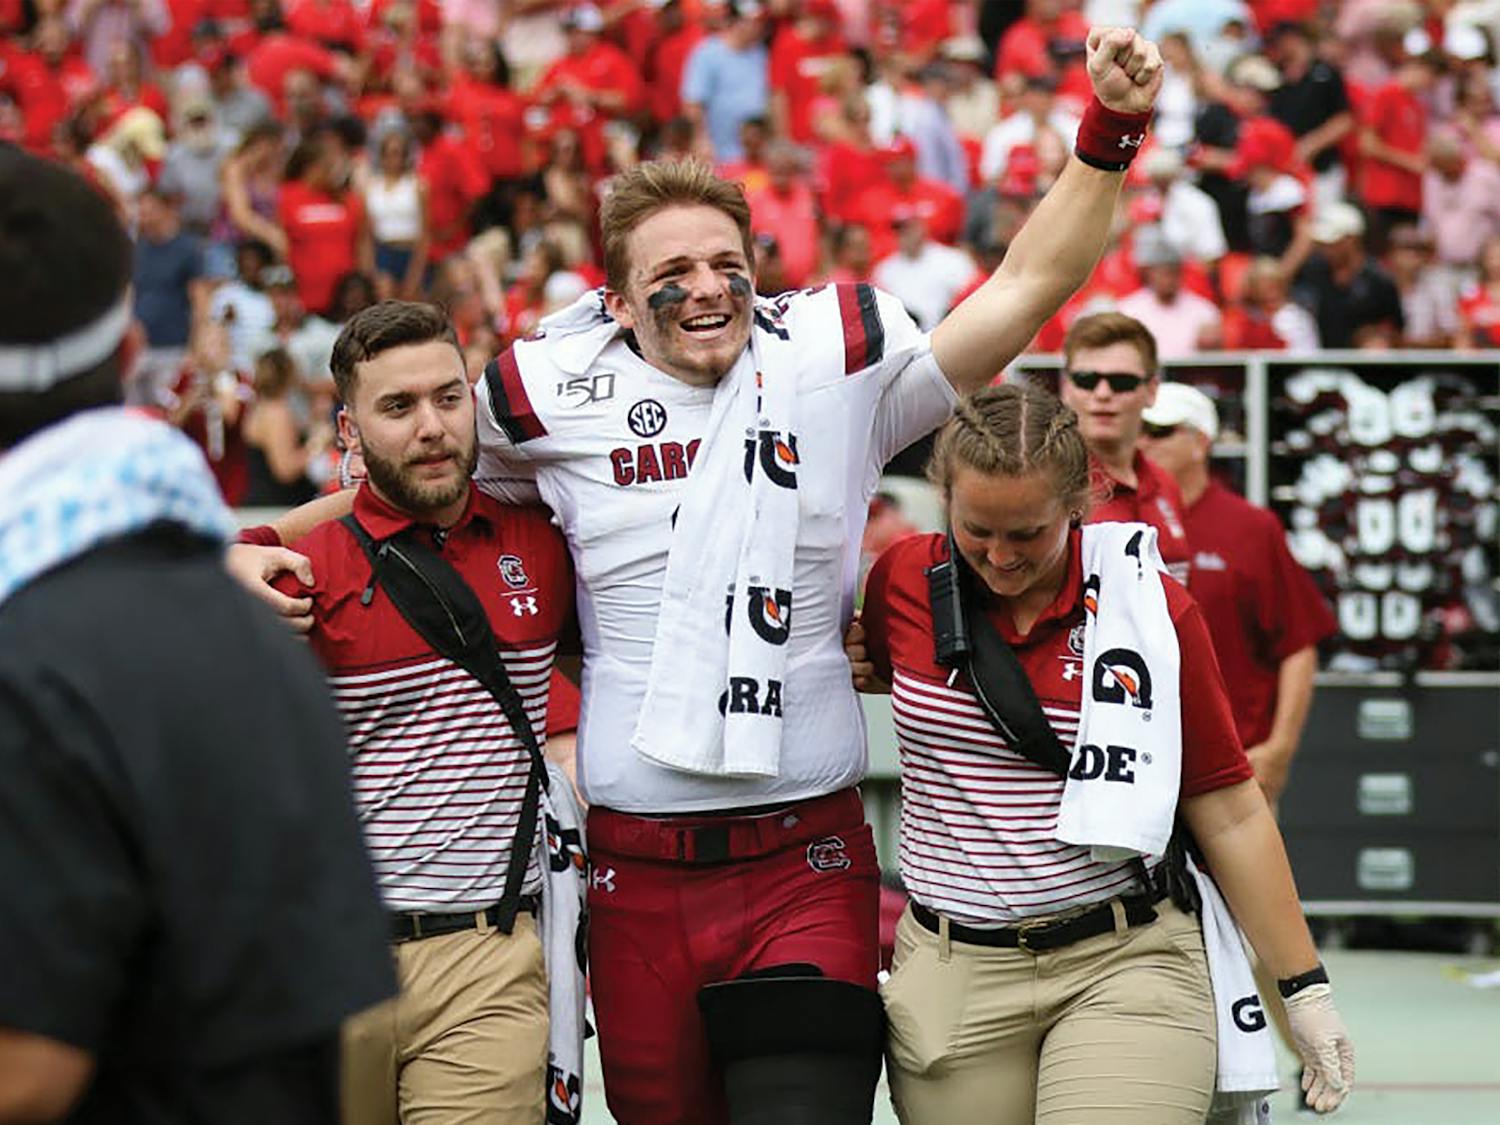 Former South Carolina quarterback Ryan Hilinski celebrates after South Carolina beat Georgia on Saturday, Oct. 12, 2019 in Athens, GA. This was the first time the Gamecocks beat the Bulldogs since 2014.